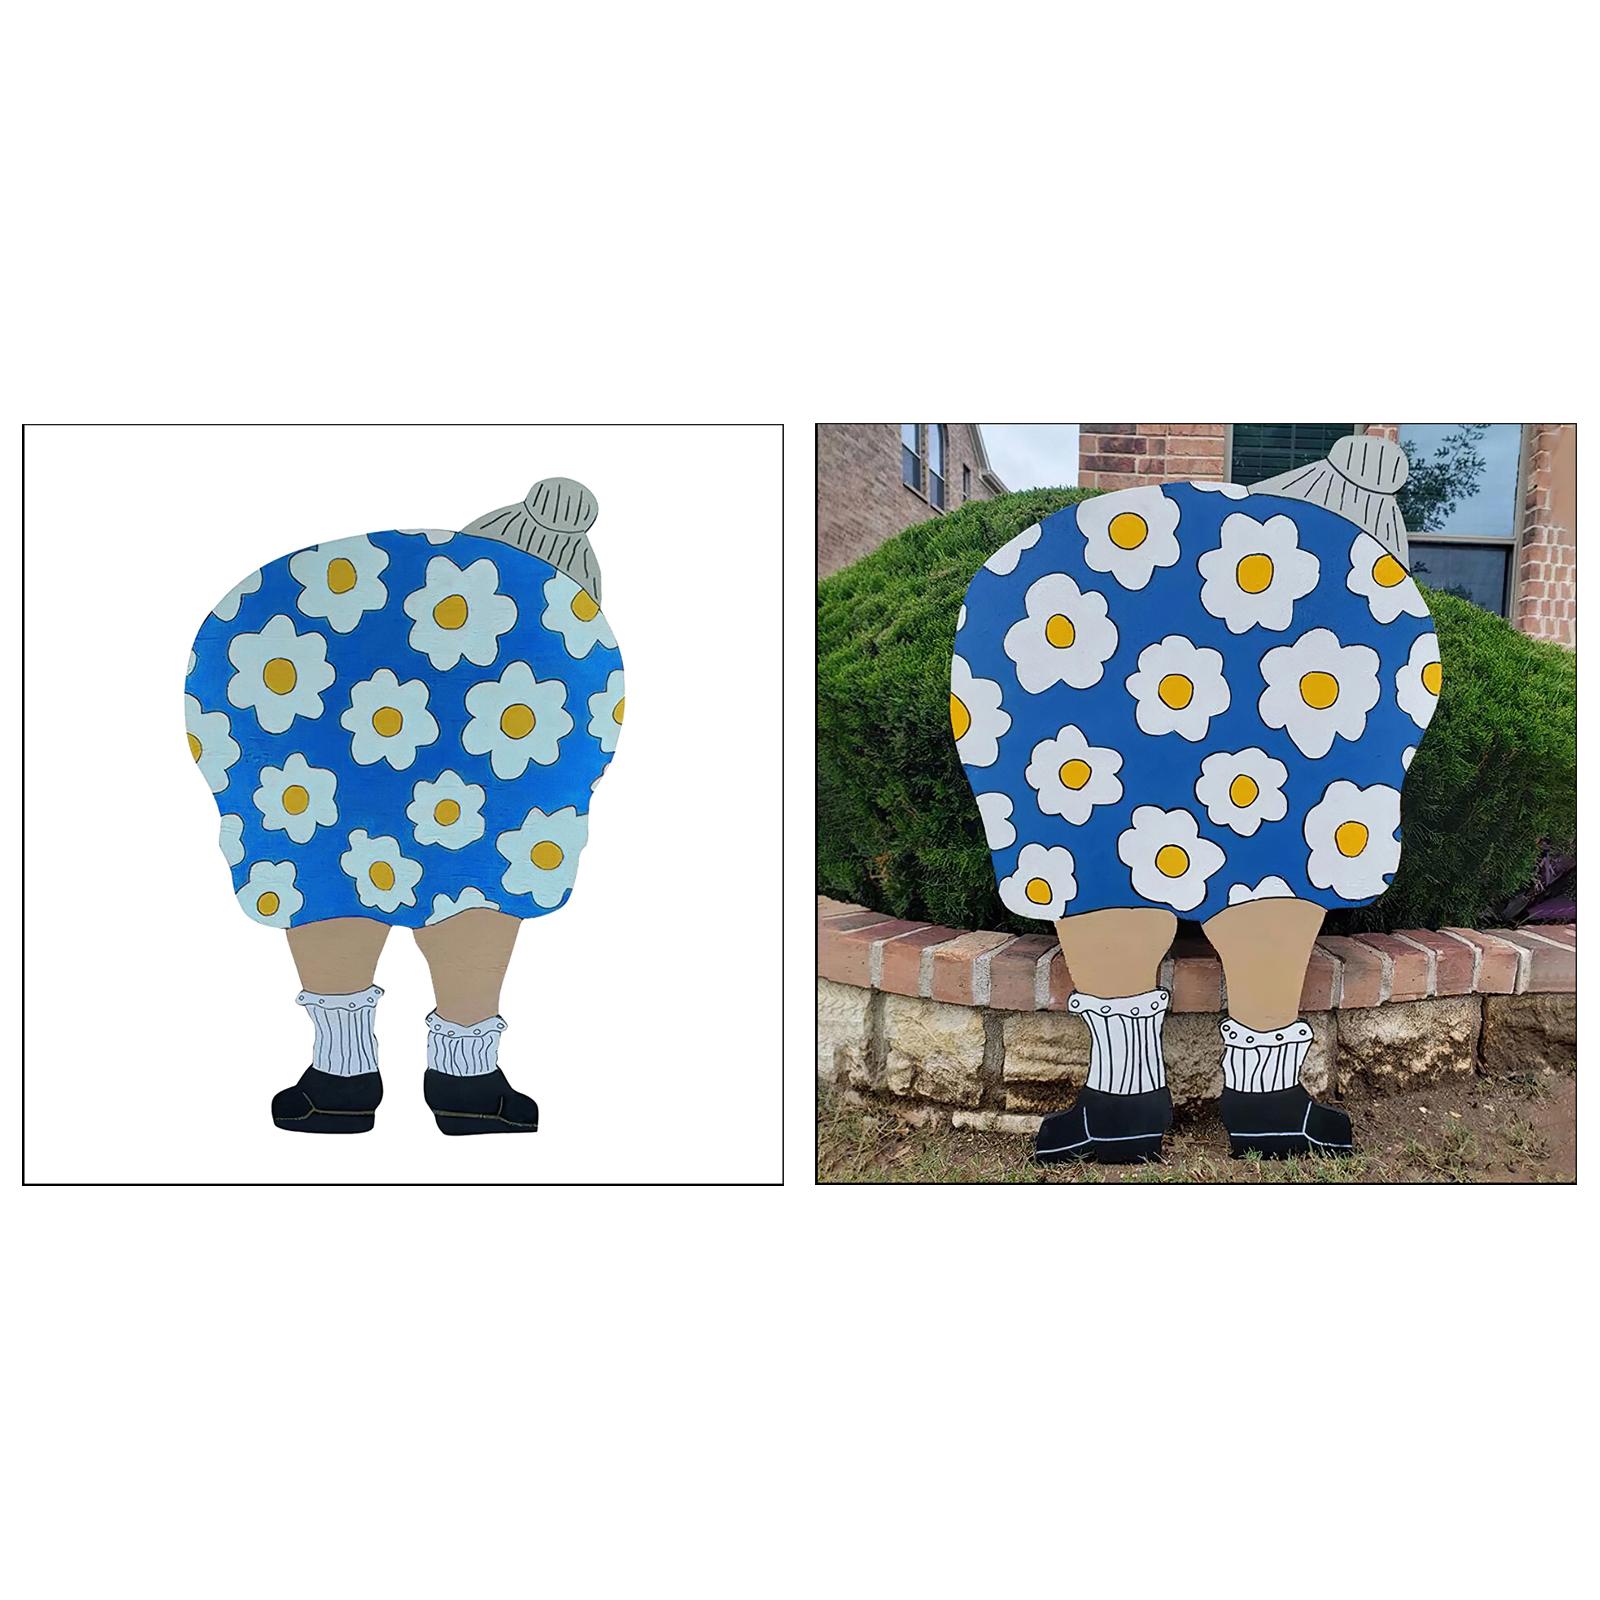 Funny Garden Ornament Silhouette Spring Decoration Housewarming Gift Blue